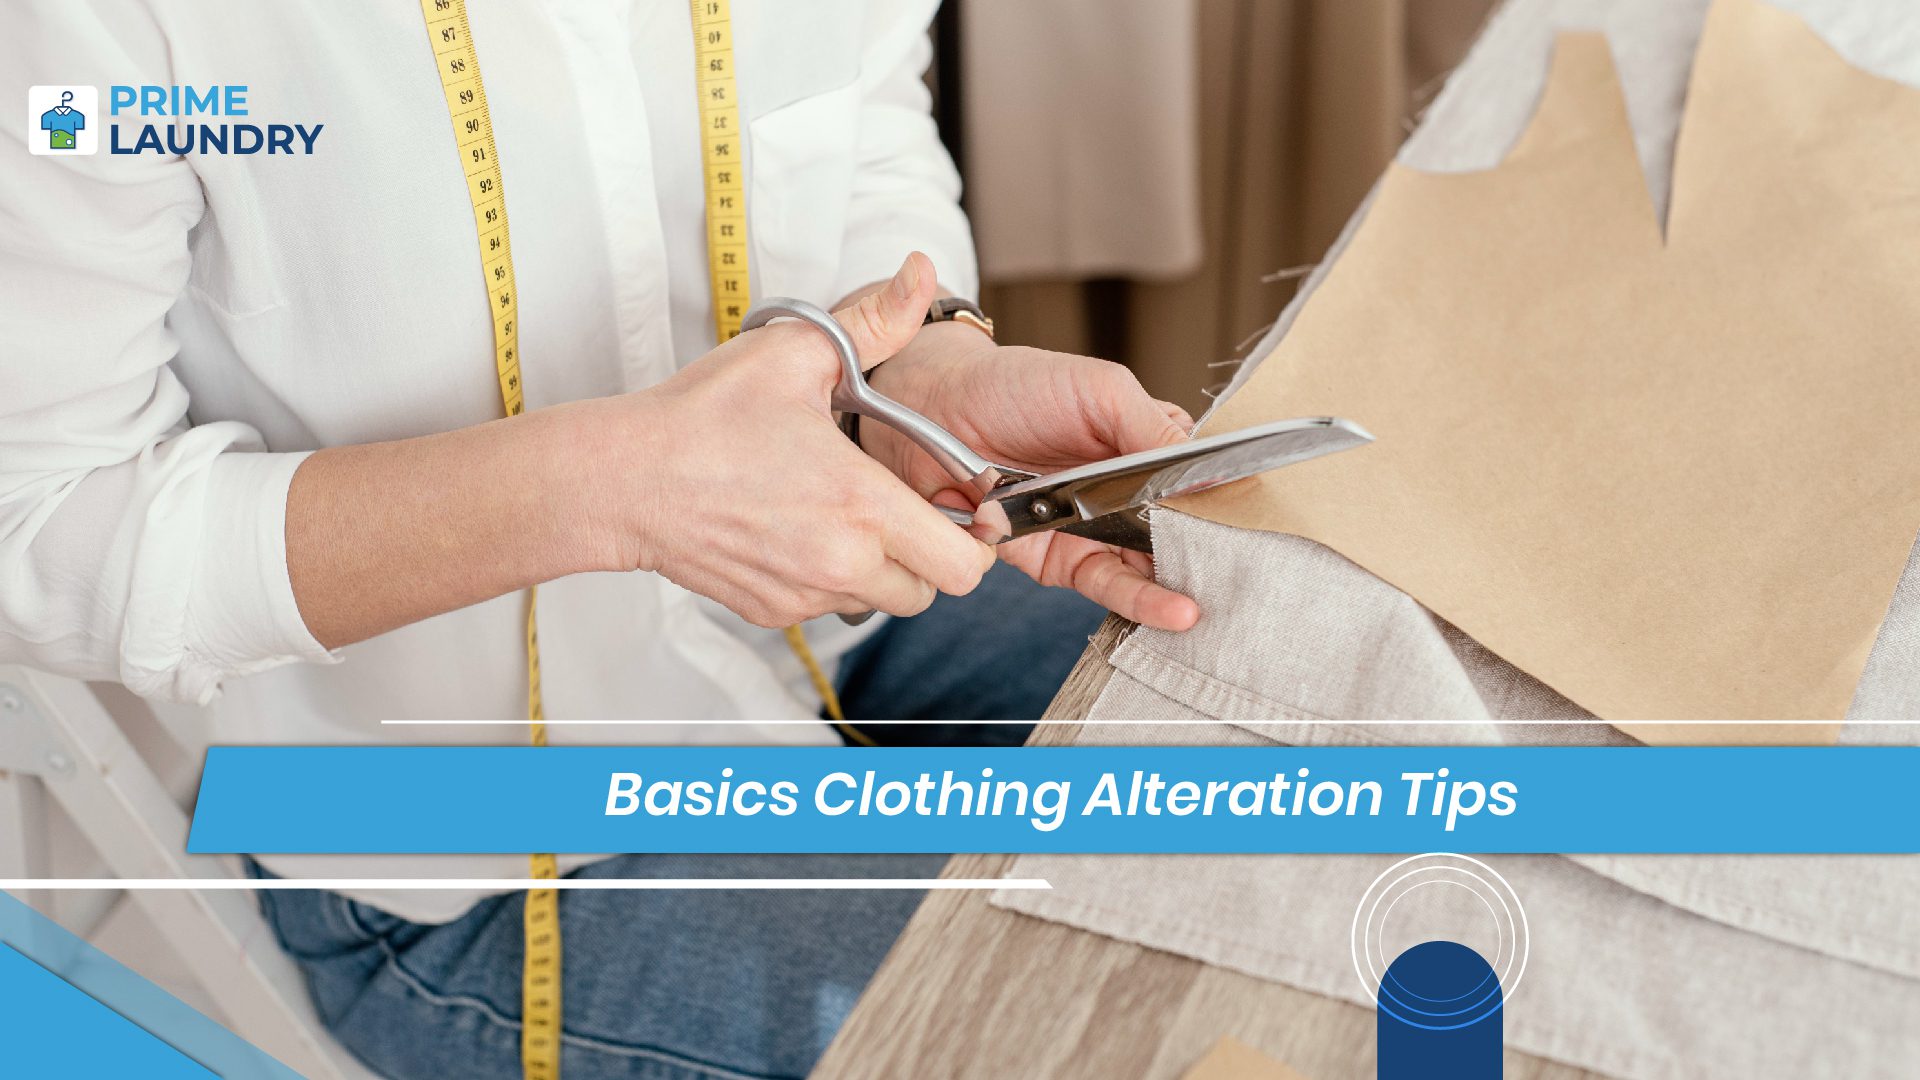 Expert Clothing Alterations - The Key To Having A Complete Wardrobe